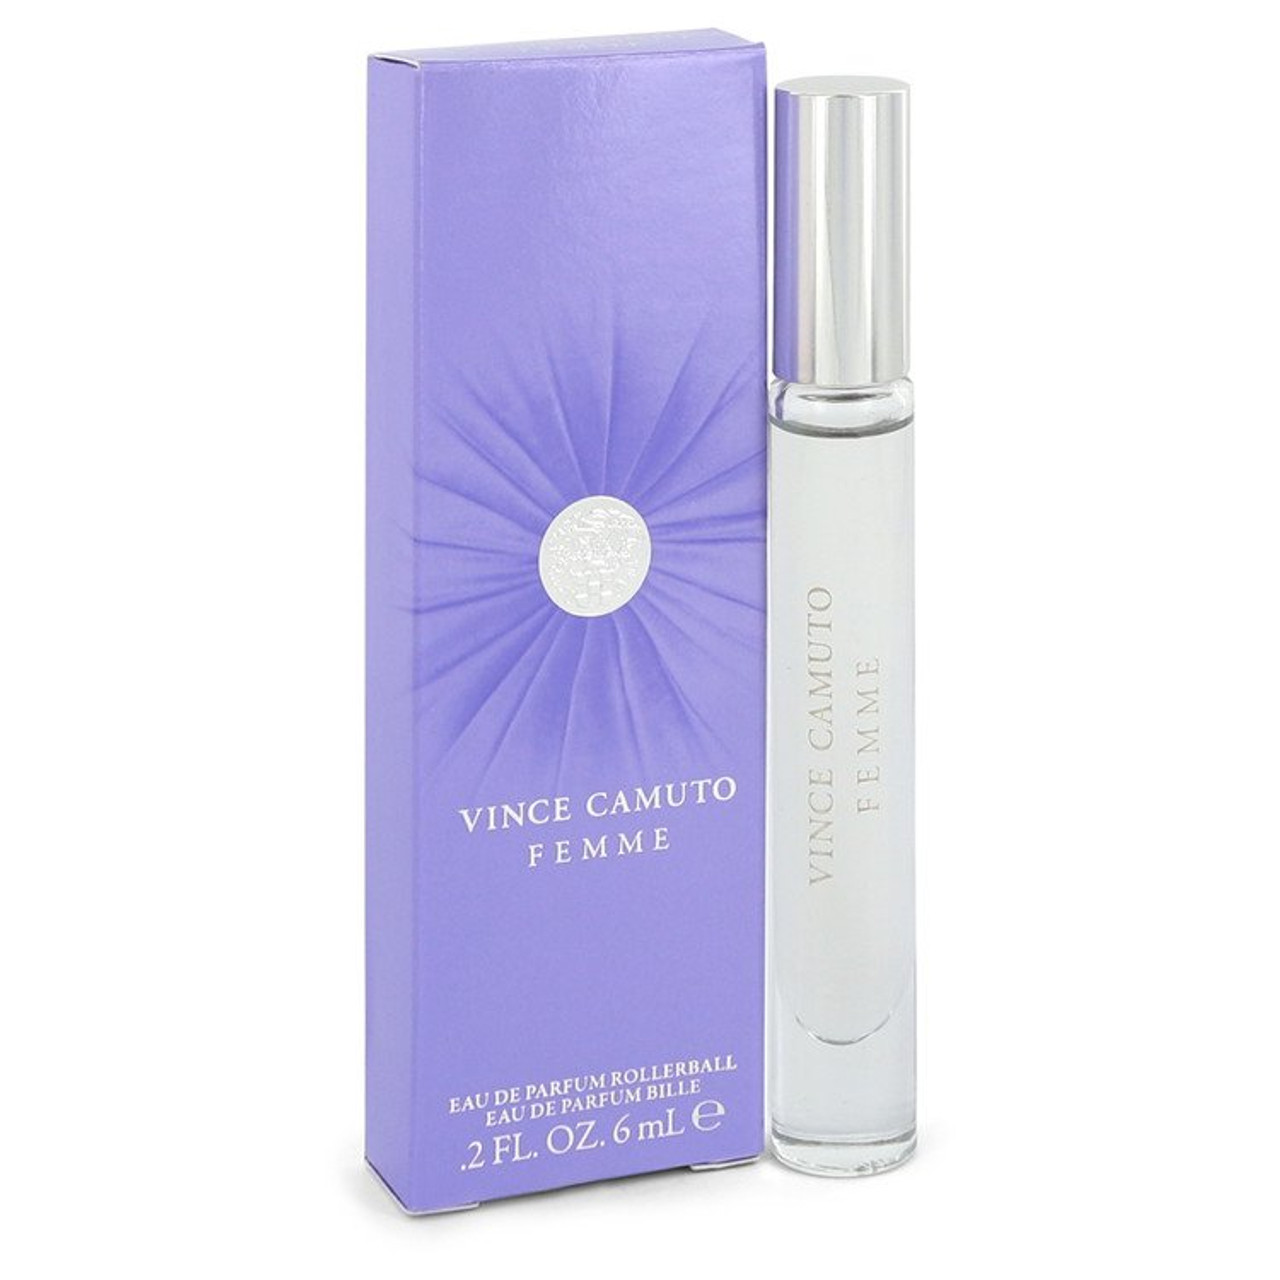 Vince Camuto Fiori By Vince Camuto Body Mist 8 Oz